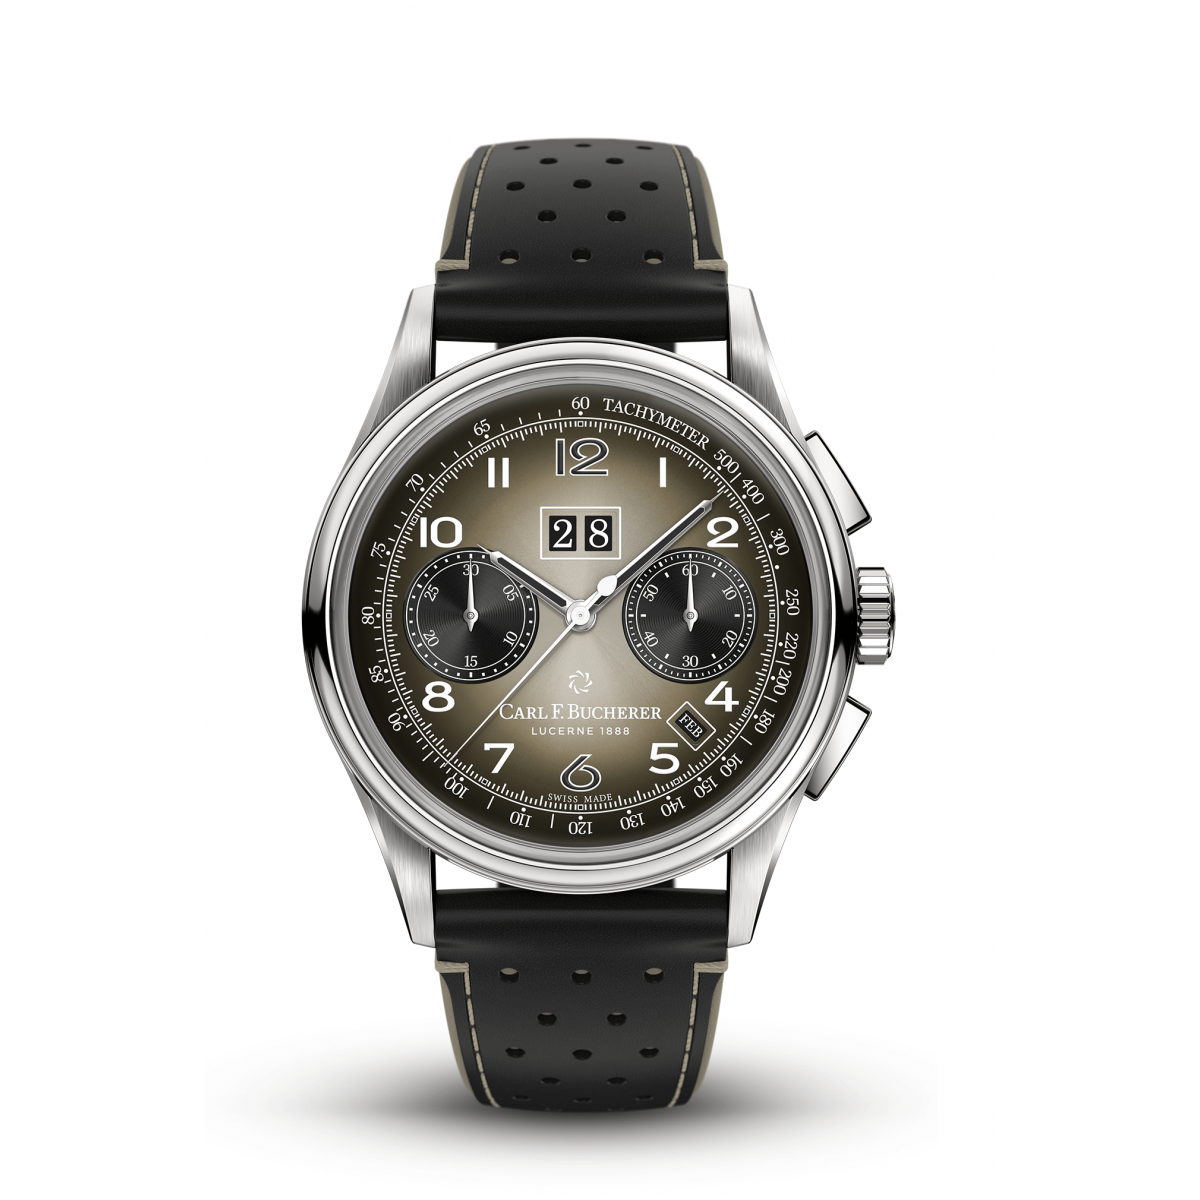 HERITAGE BICOMPAX ANNUAL HOMETOWN EDITION LUCERNE : REF : 00.10803.08.92.85